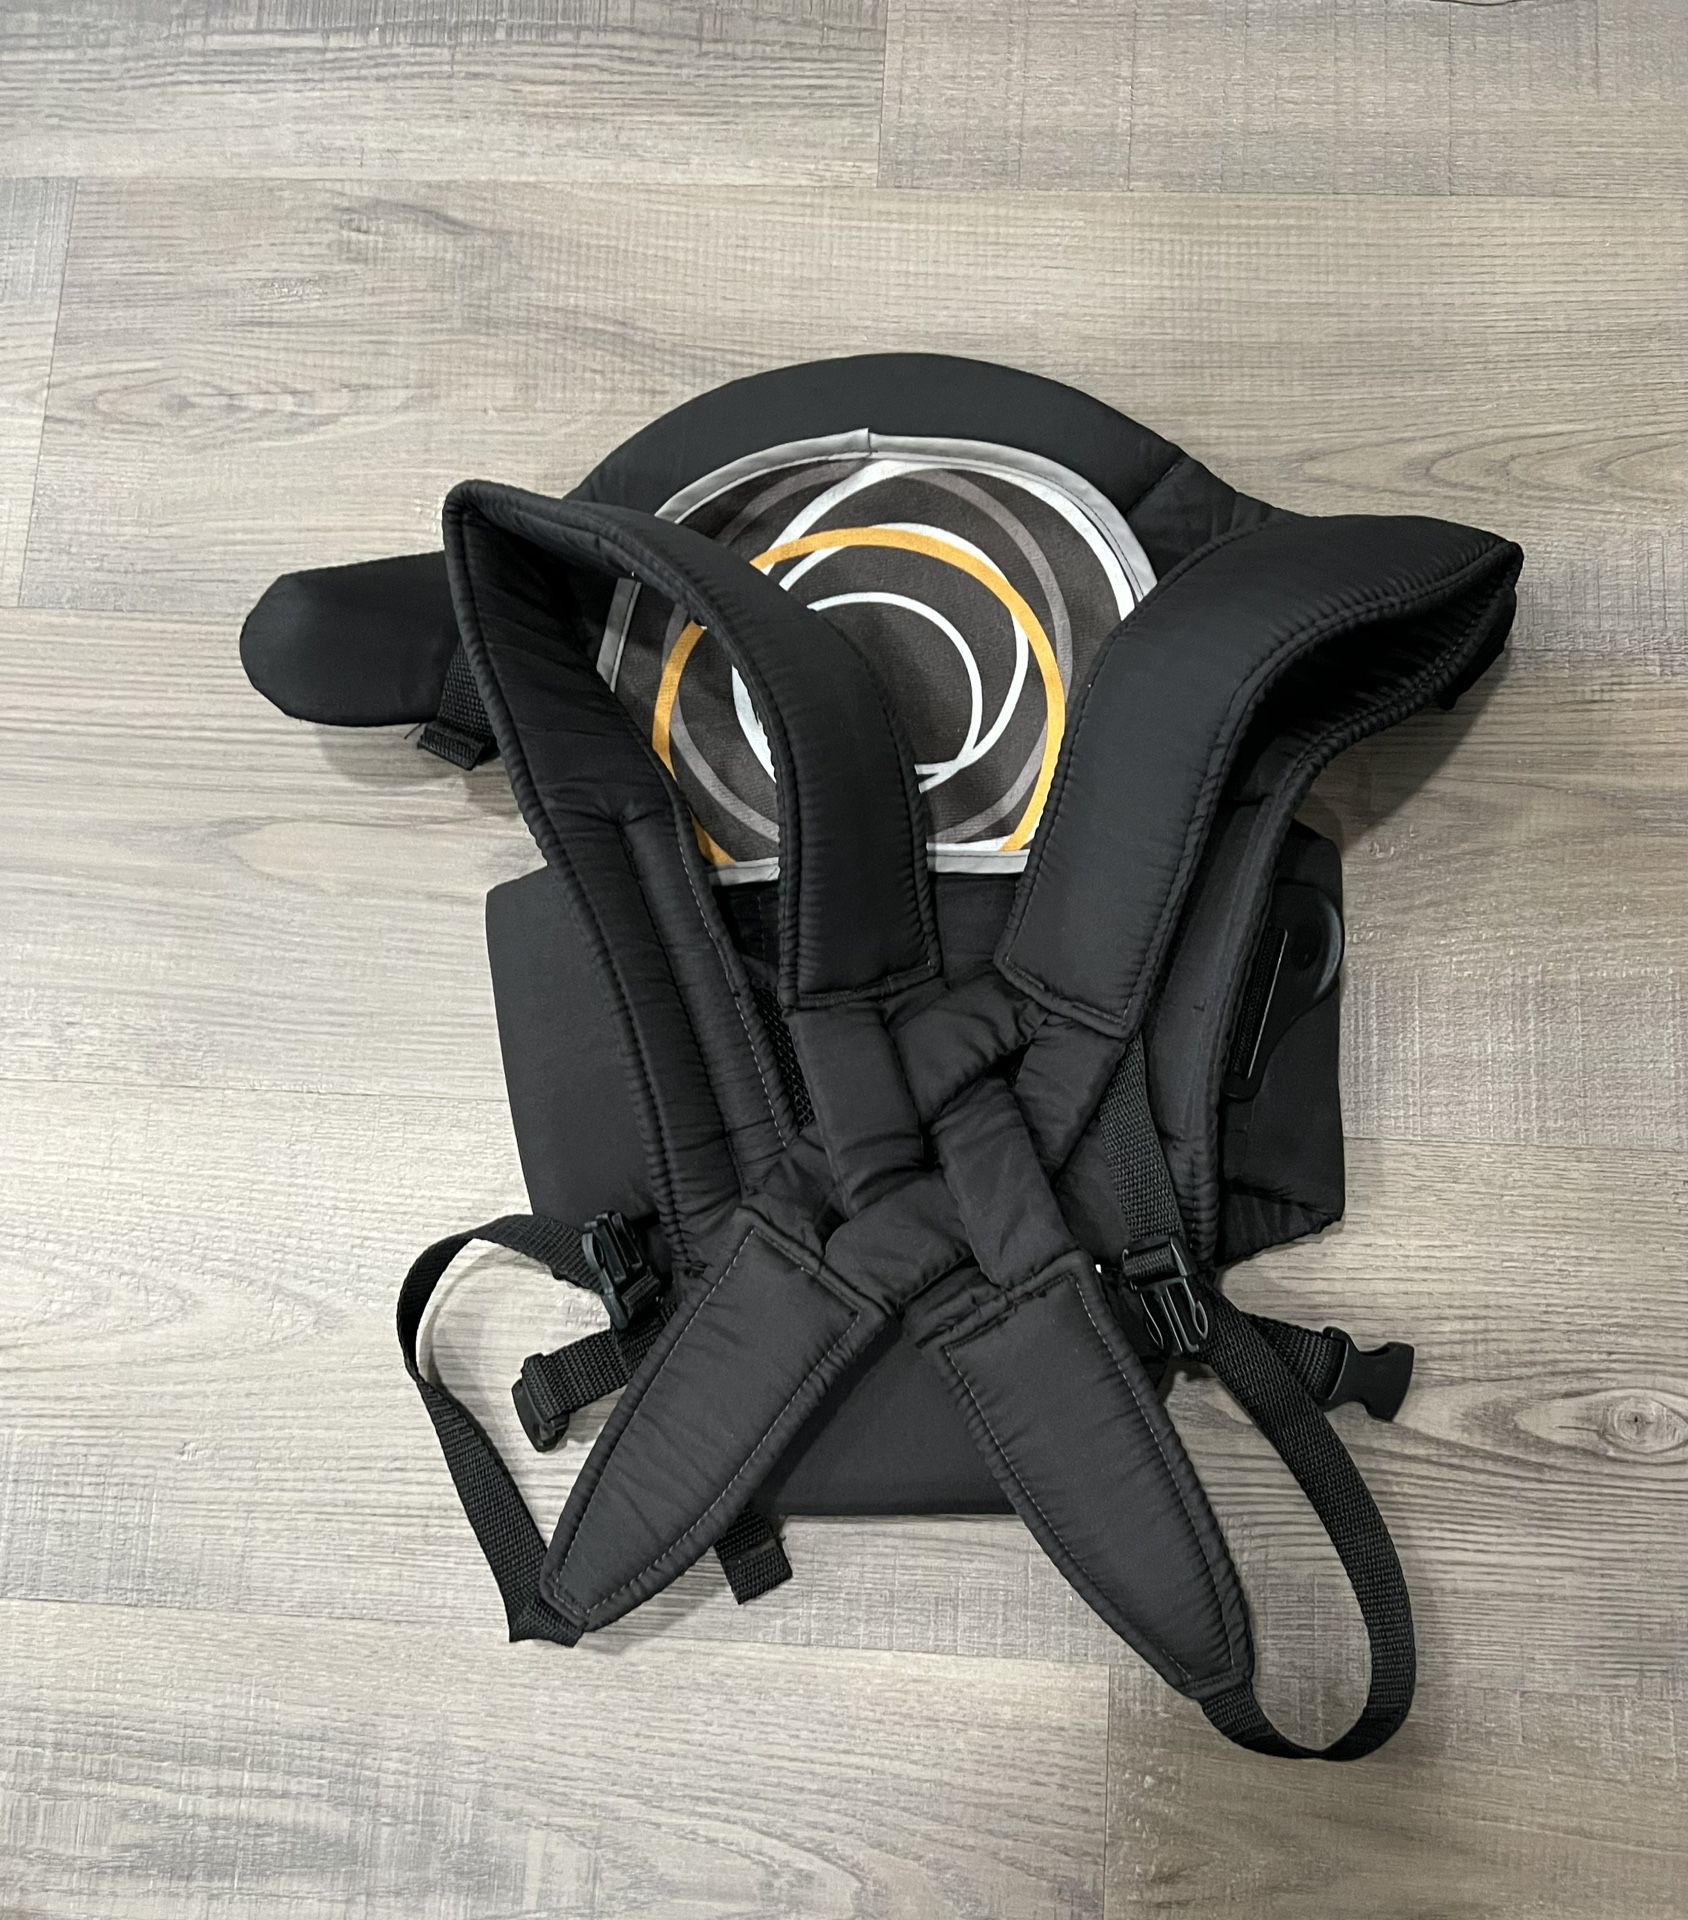 Black Baby Carrier